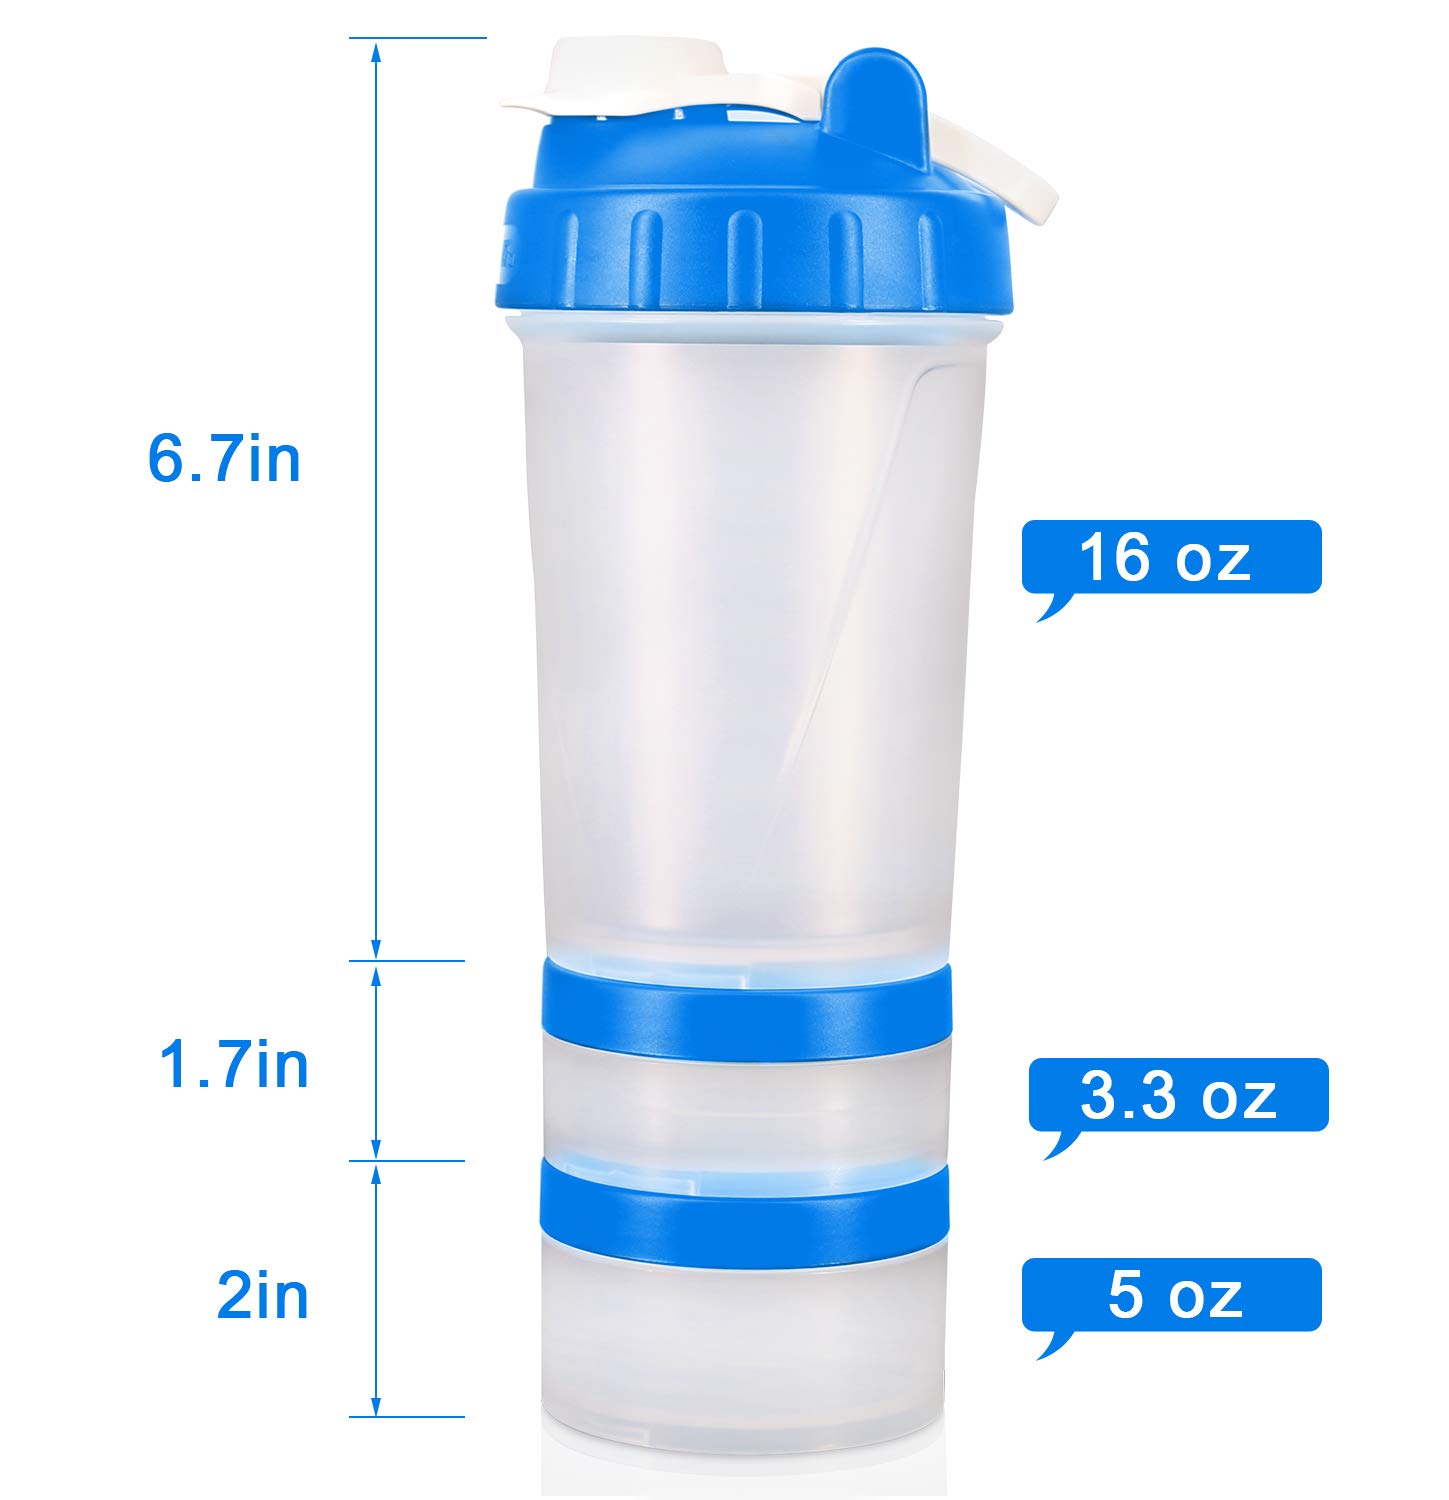 Hydro2Go 16 OZ Protein Workout Shaker Bottle with Mixer Ball and 2 close-connected Storage Jars for Pills, Snacks, Coffee, Tea. 100% BPA-Free, Non Toxic and Leak Proof Sports Bottle